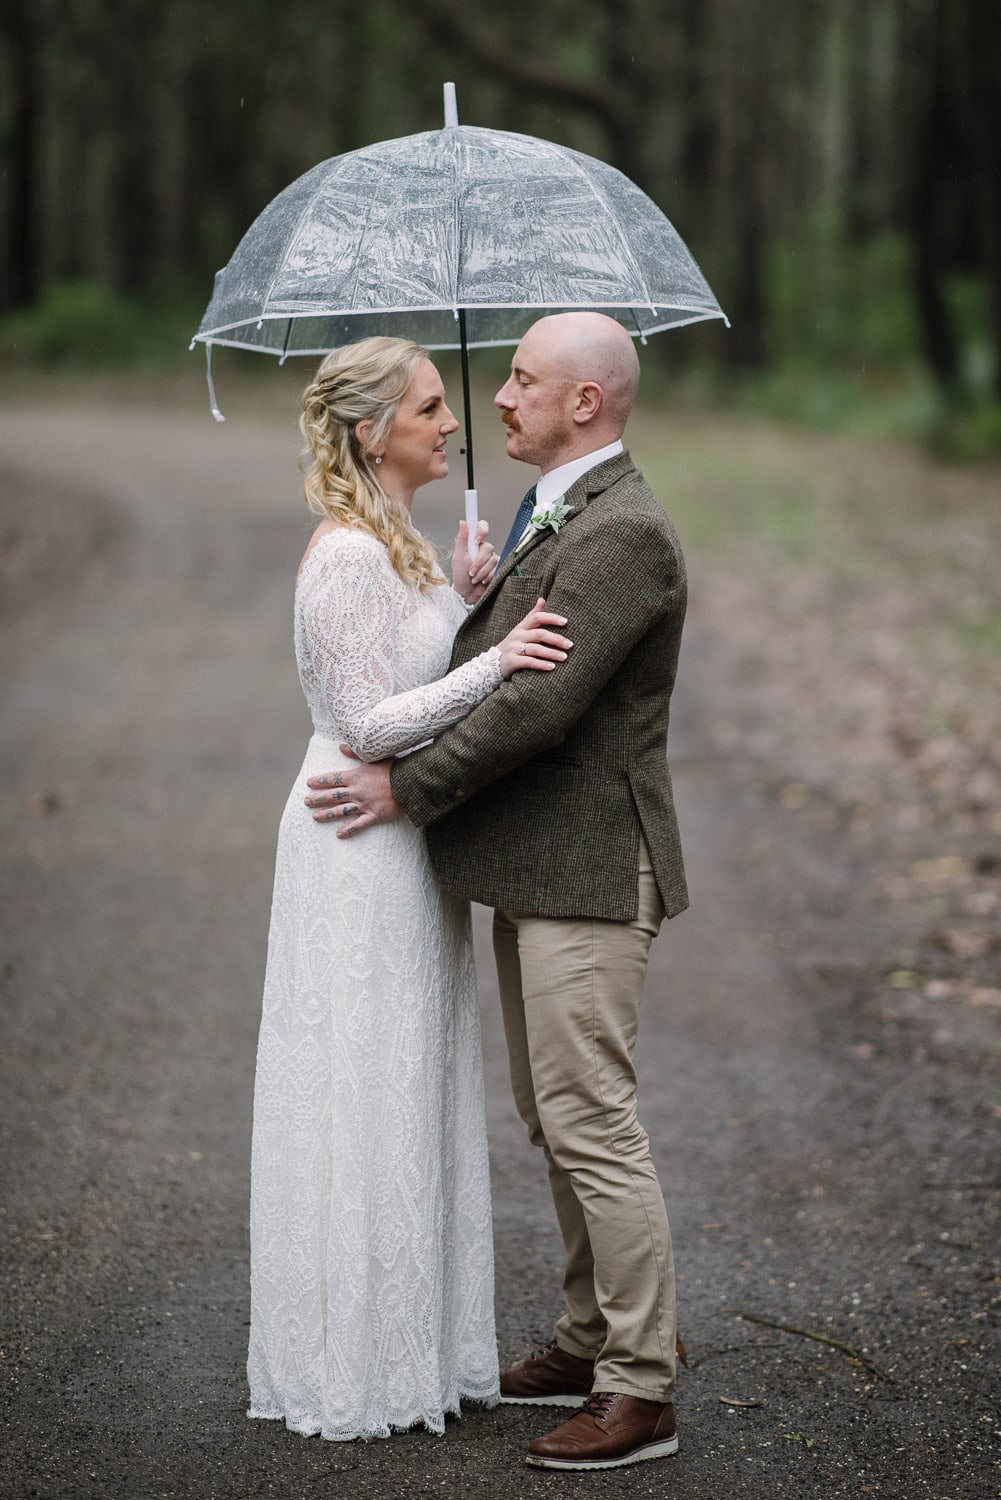 Bride and groom in the rain under an umbrella